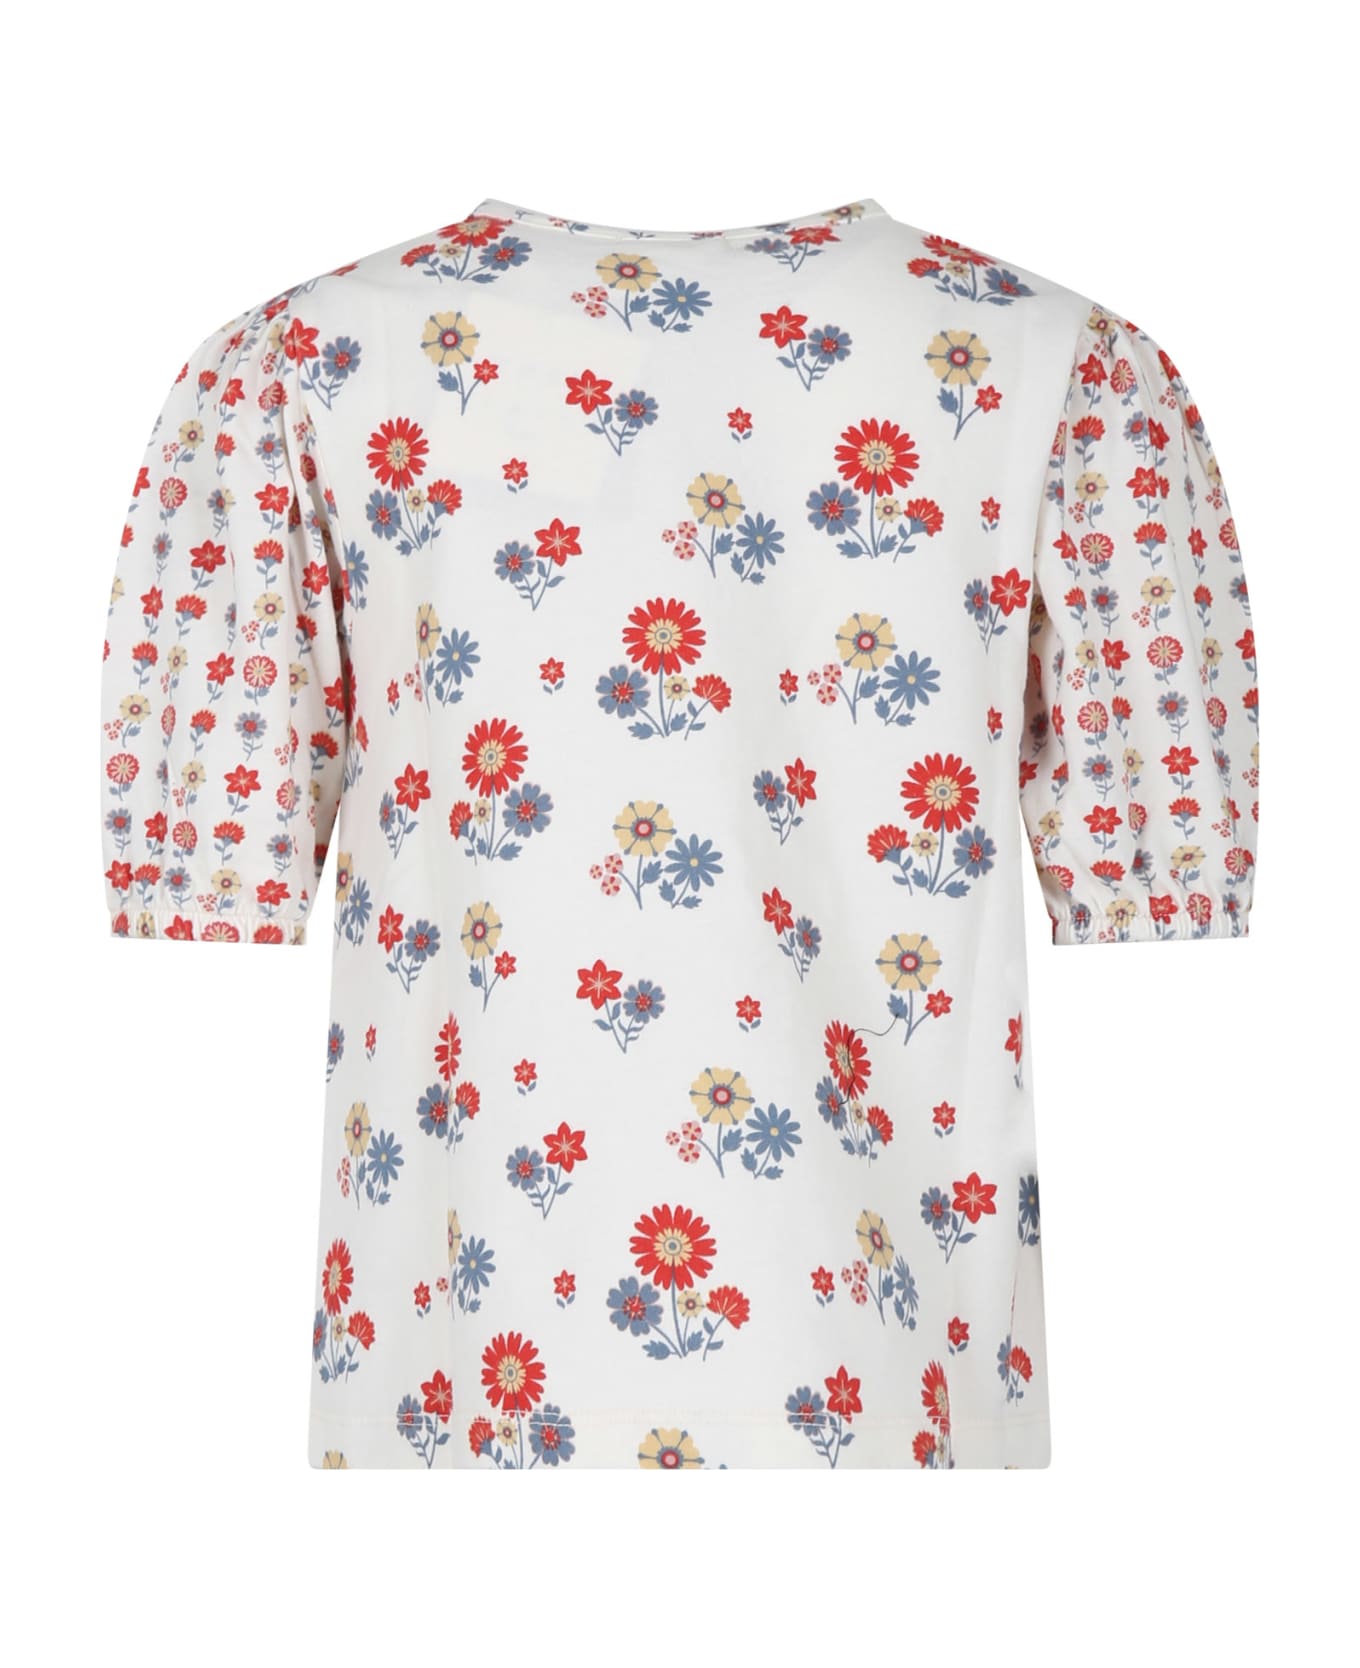 Coco Au Lait Ivory Top For Girl With Flowers Print - Ivory トップス